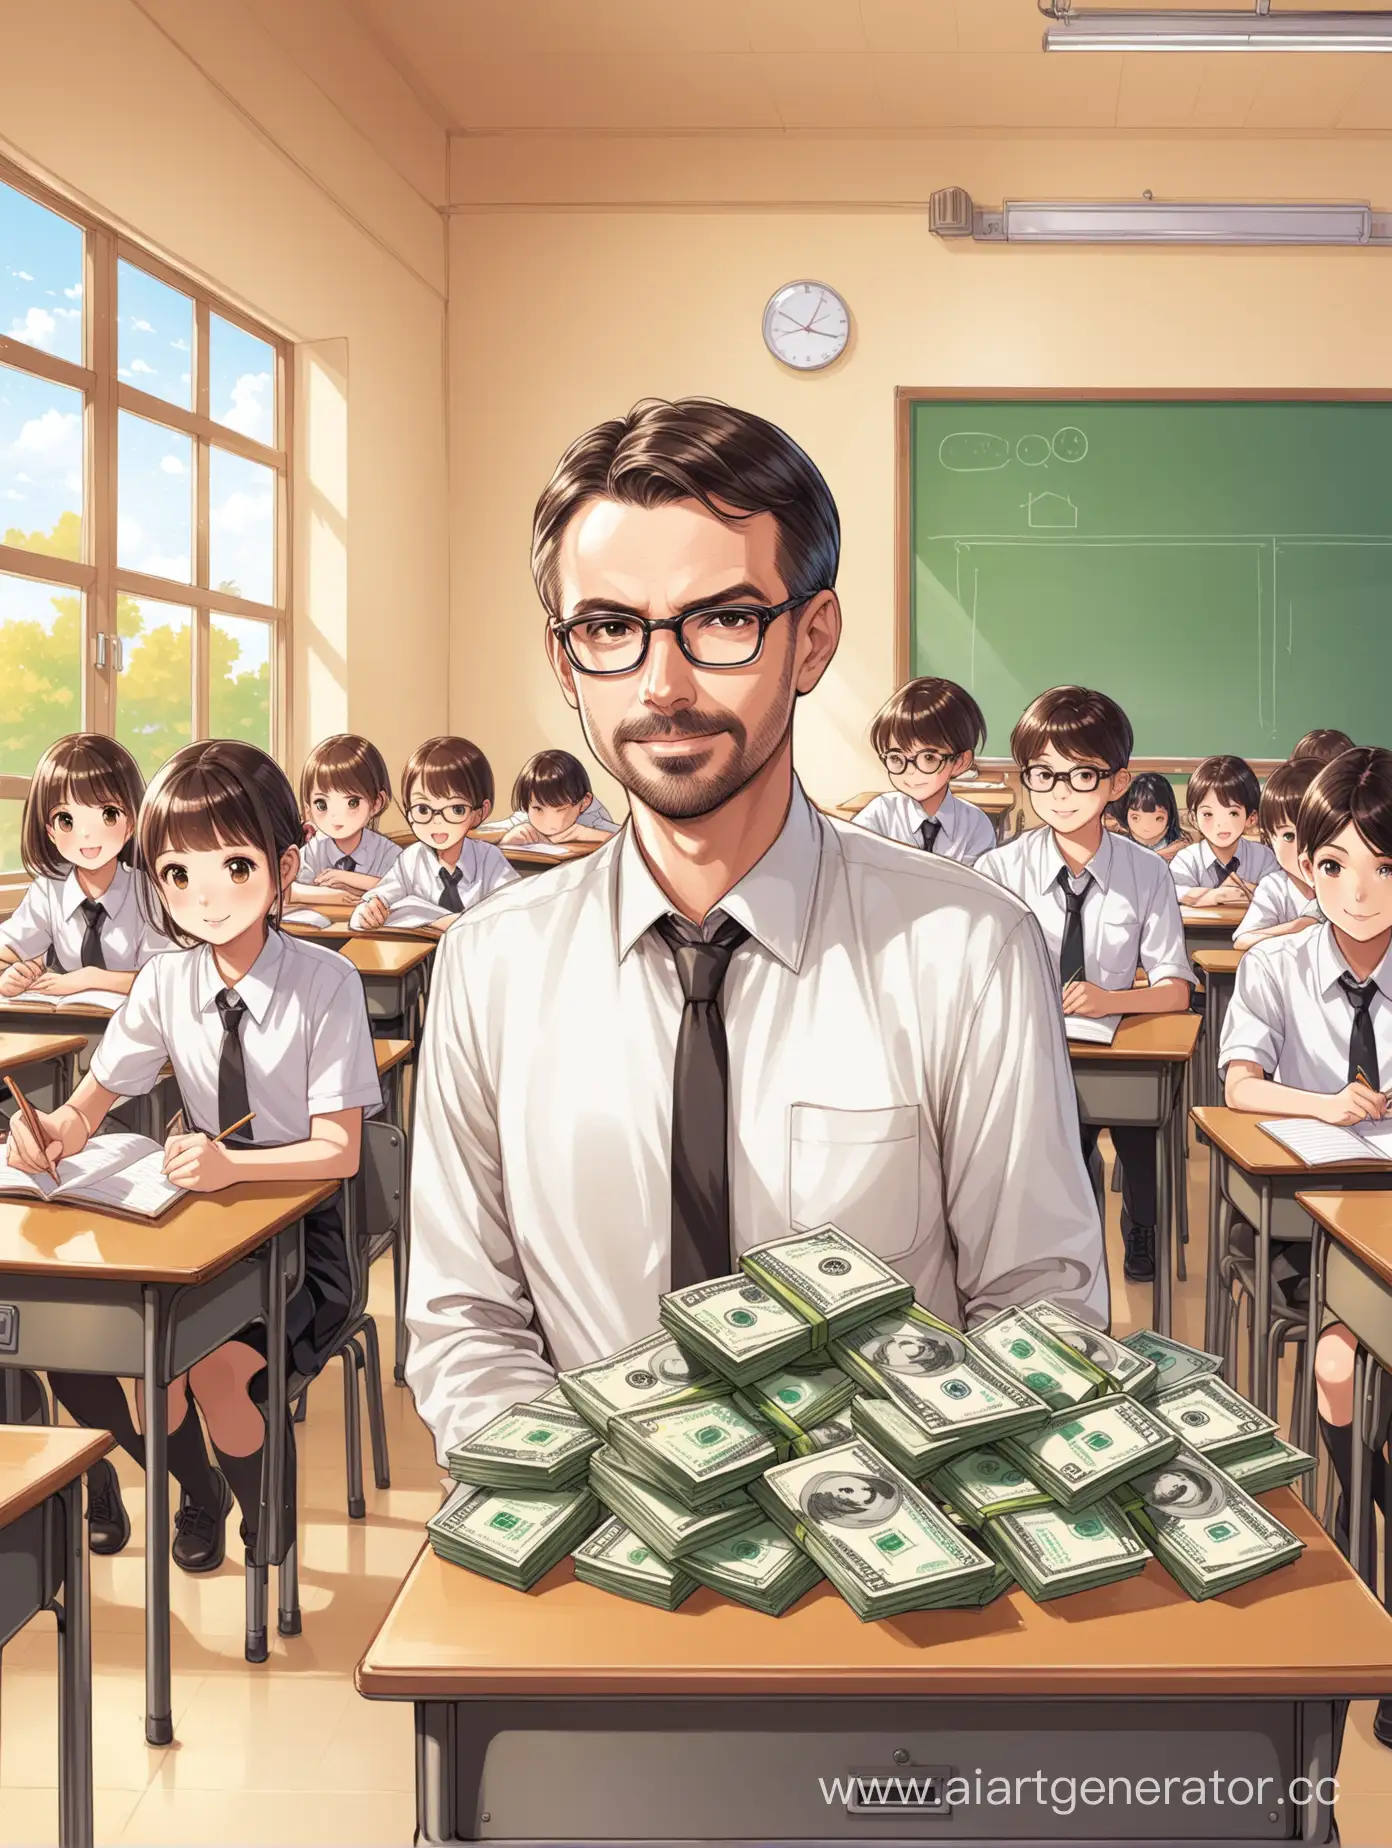 Classroom-Scene-with-Teacher-and-Overflowing-Money